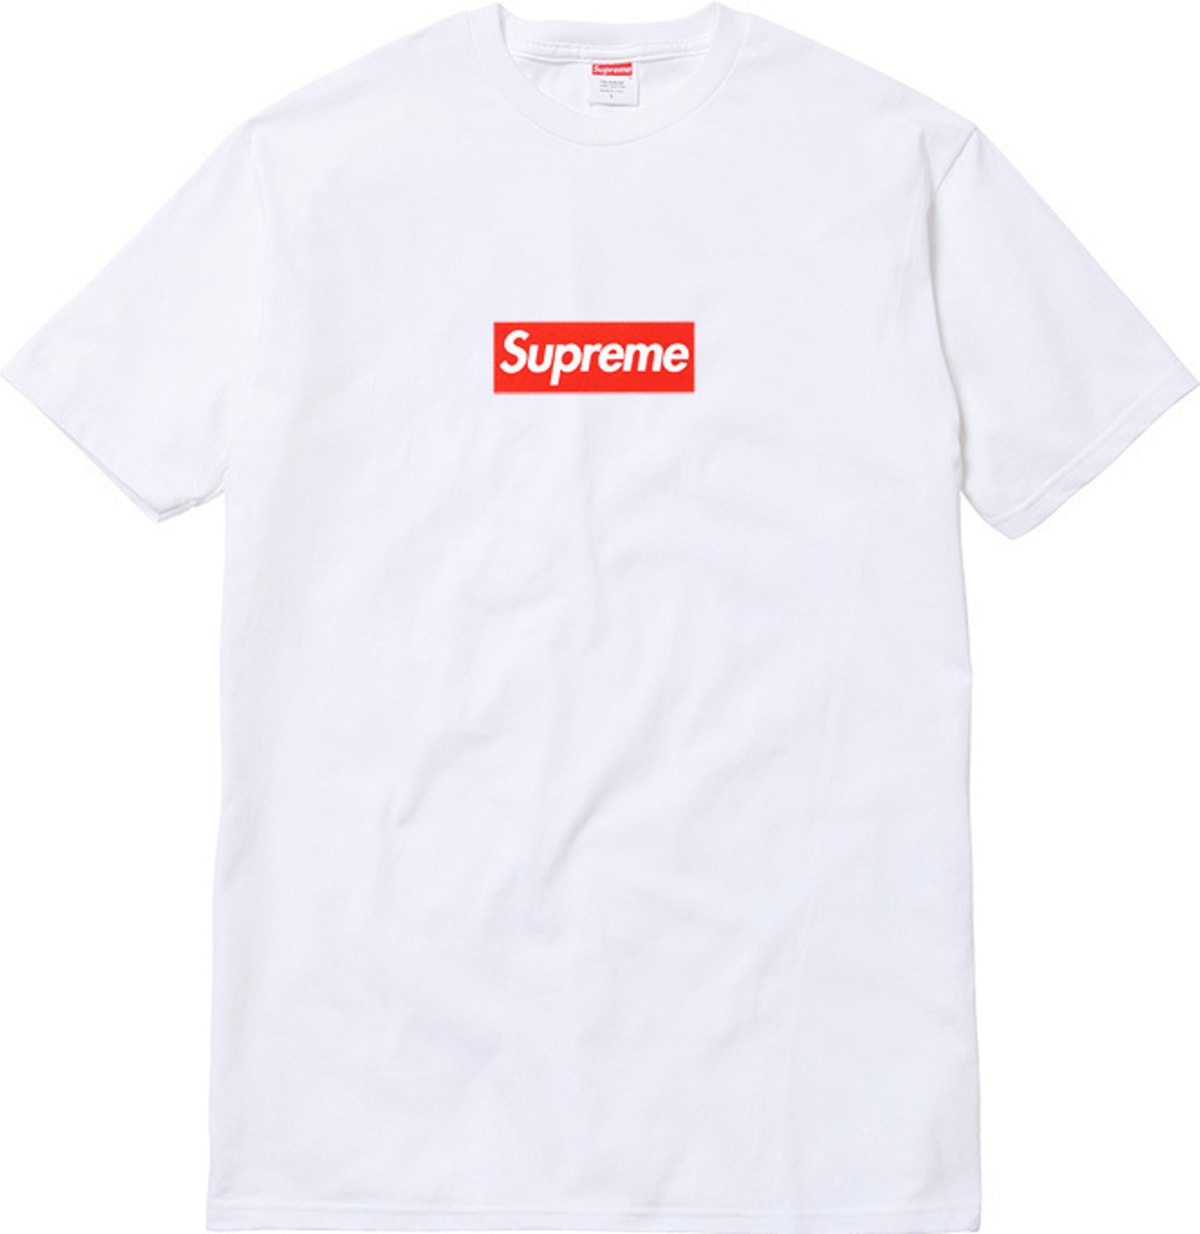 Supreme Re-Releases Iconic Box Logo T-Shirt for 20th Anniversary | Complex